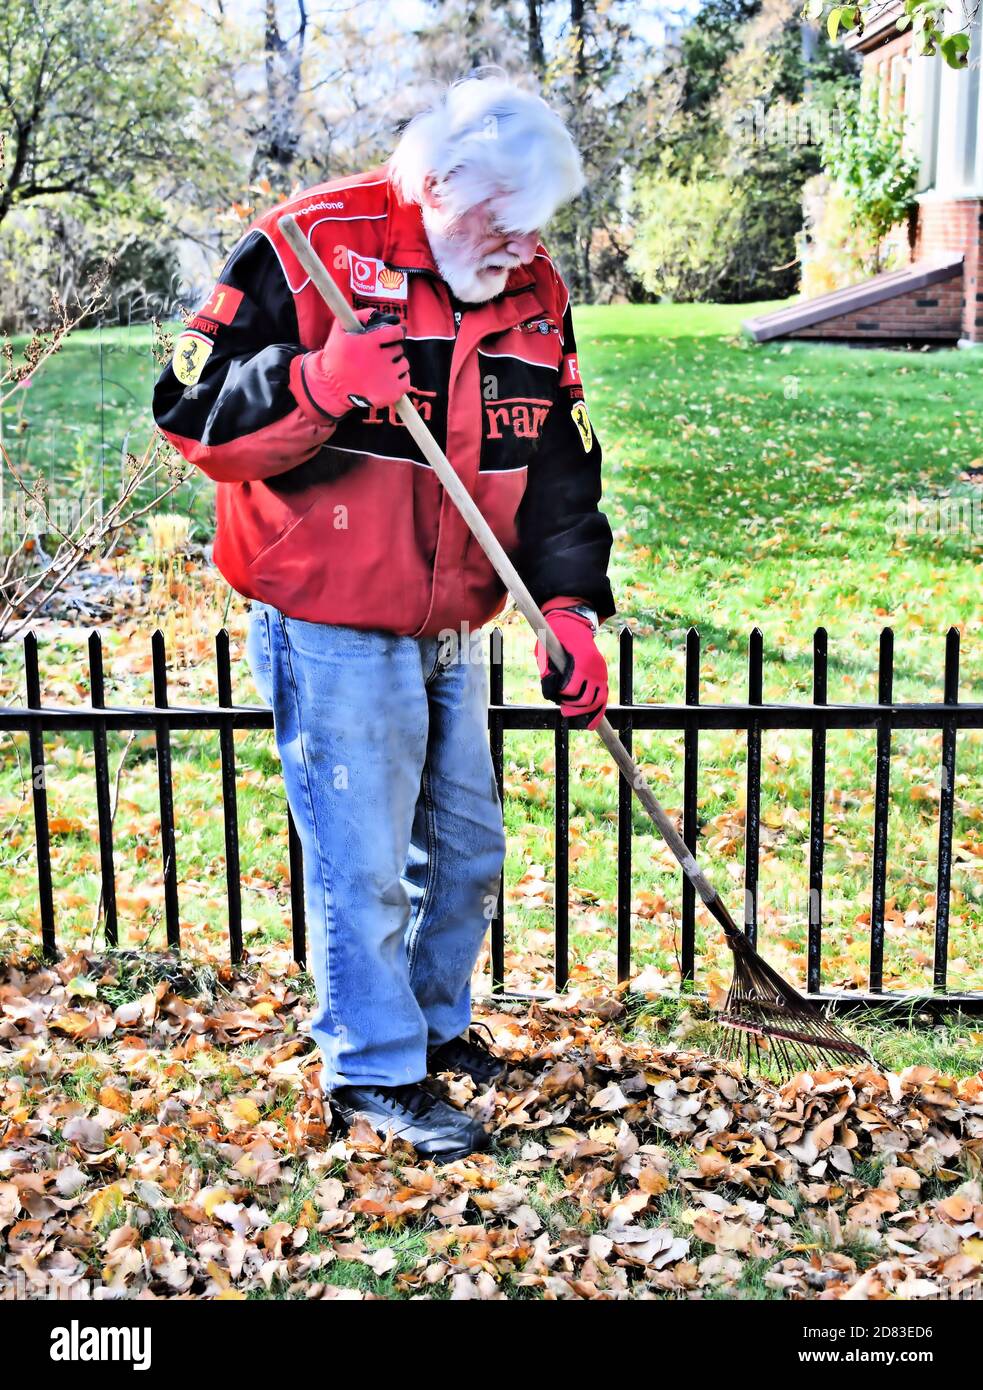 Senior with white hair and red jacket raking leaves in Autumn Stock Photo